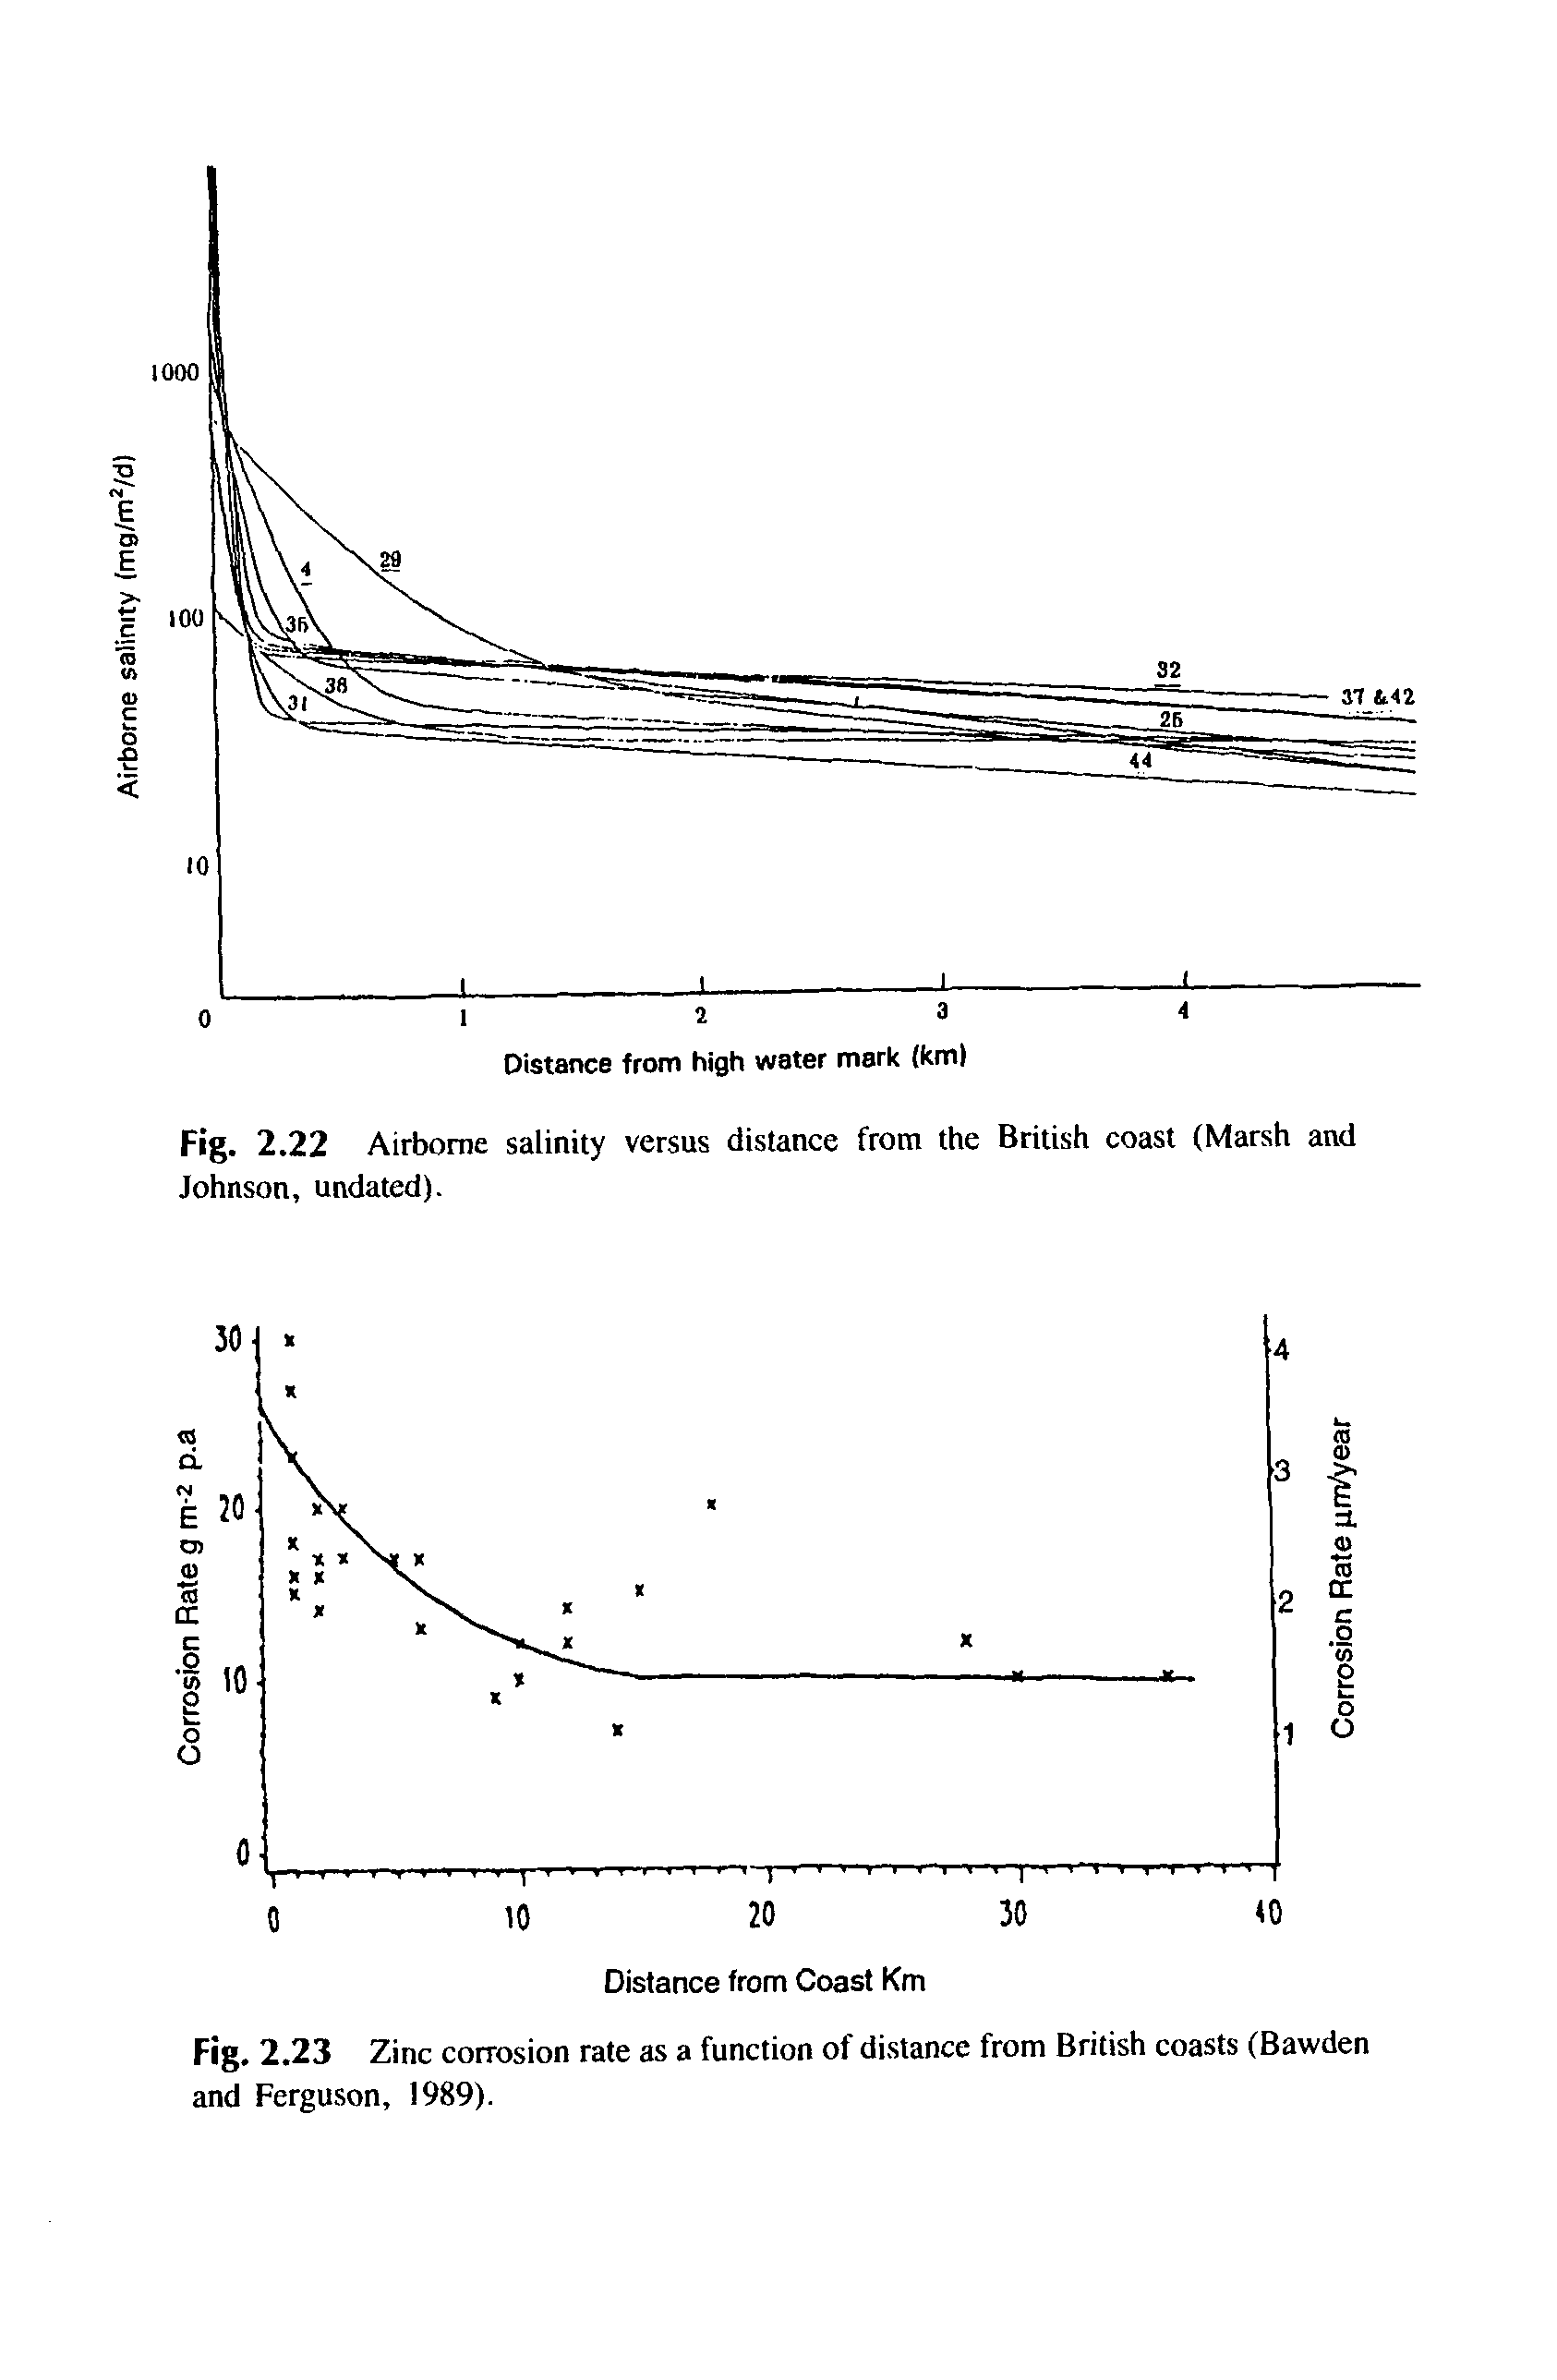 Fig. 2.23 Zinc corrosion rate as a function of distance from British coasts (Bawden and Ferguson, 1989).